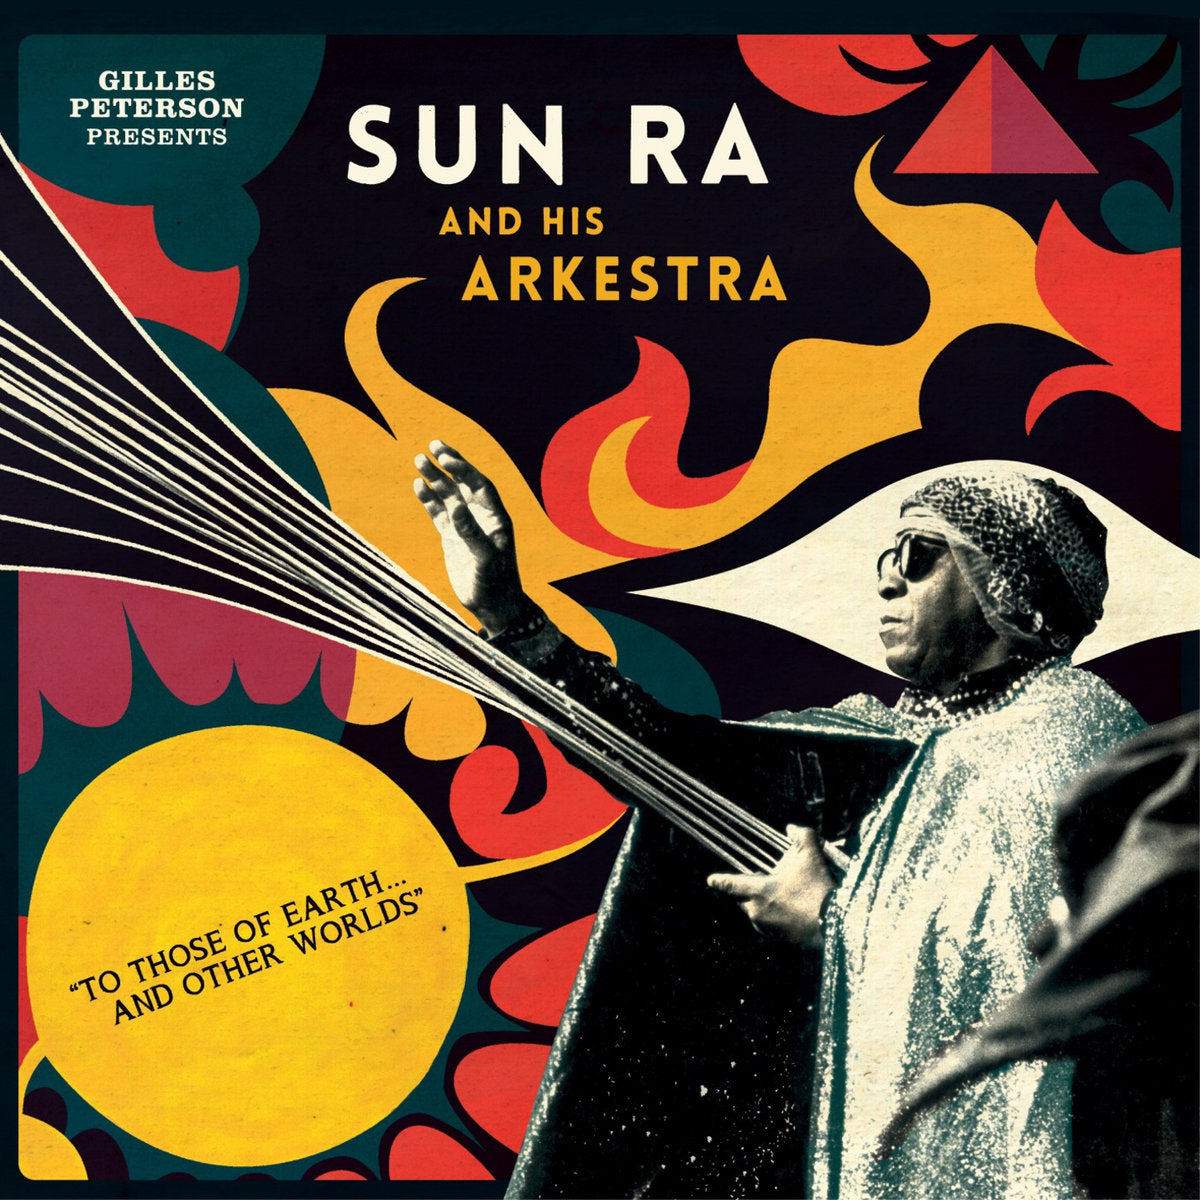 Sun Ra and His Arkestra - To Those Of Earth And Other Worlds (Gilles Peterson presents)